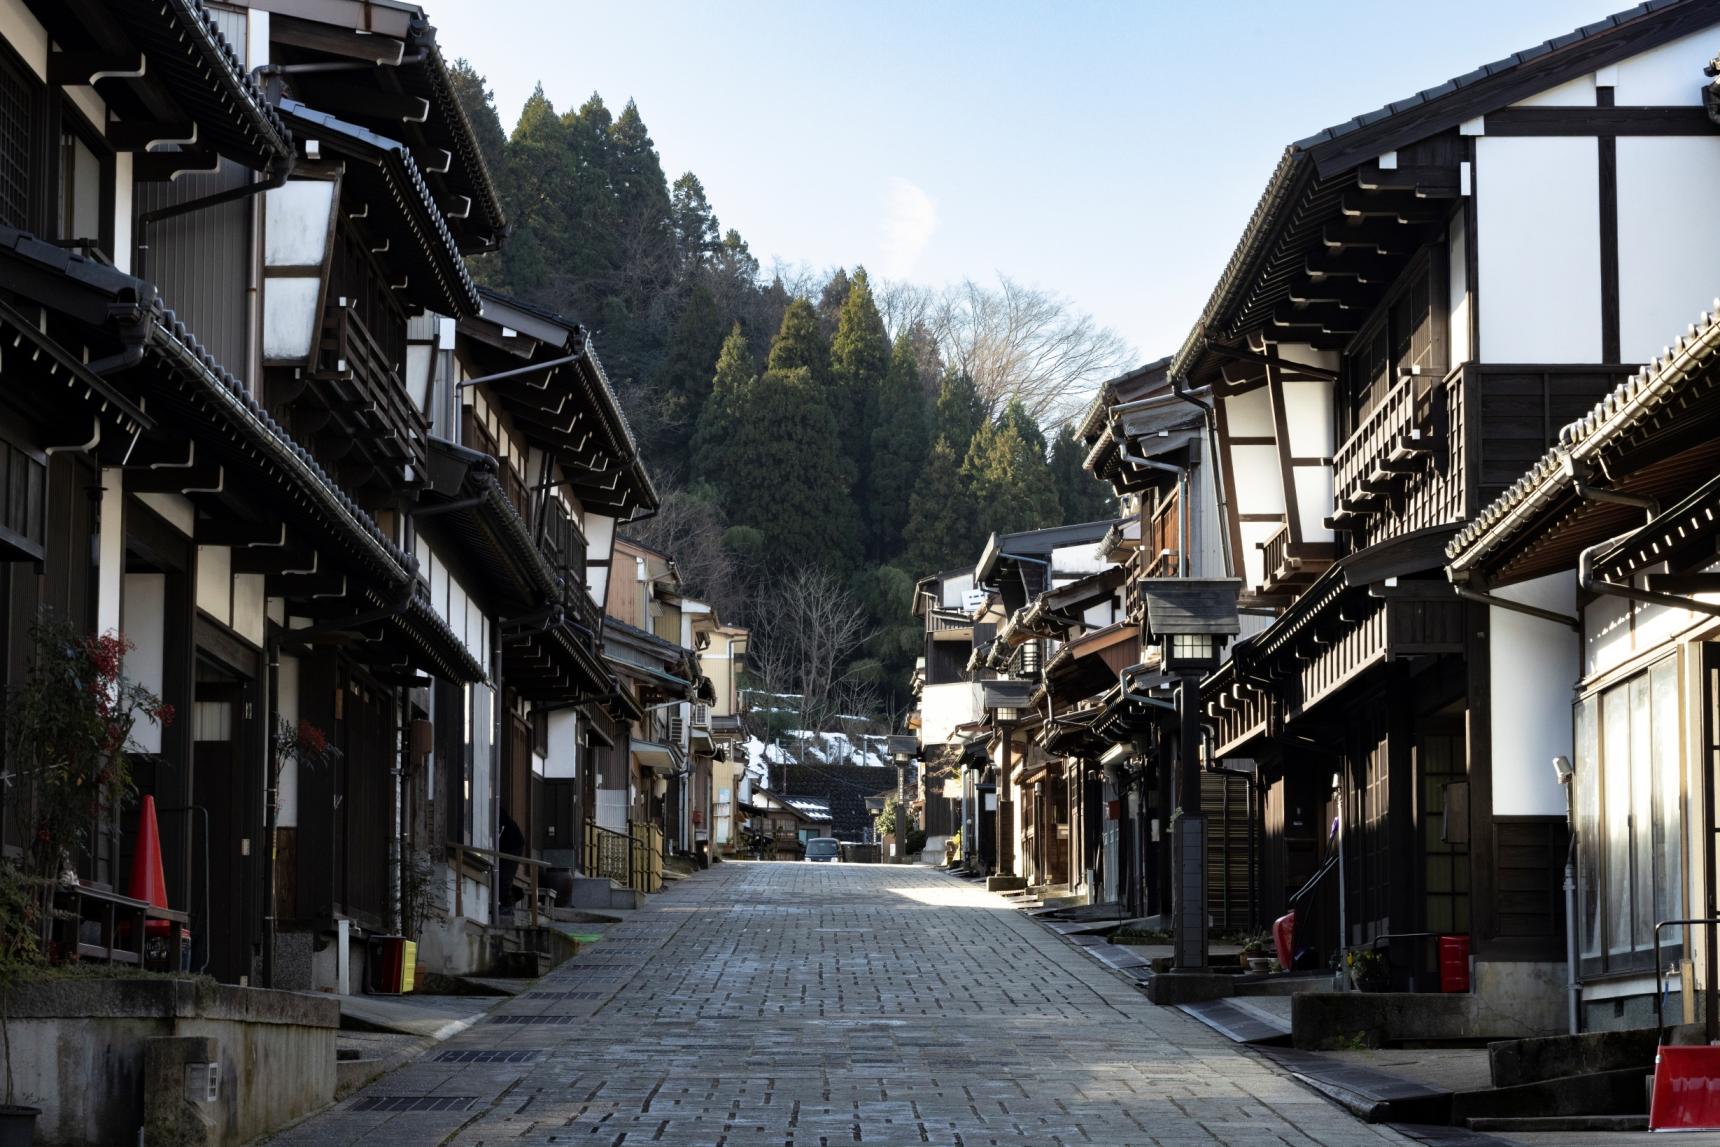 Yatsuo: Historical streets rich in culture